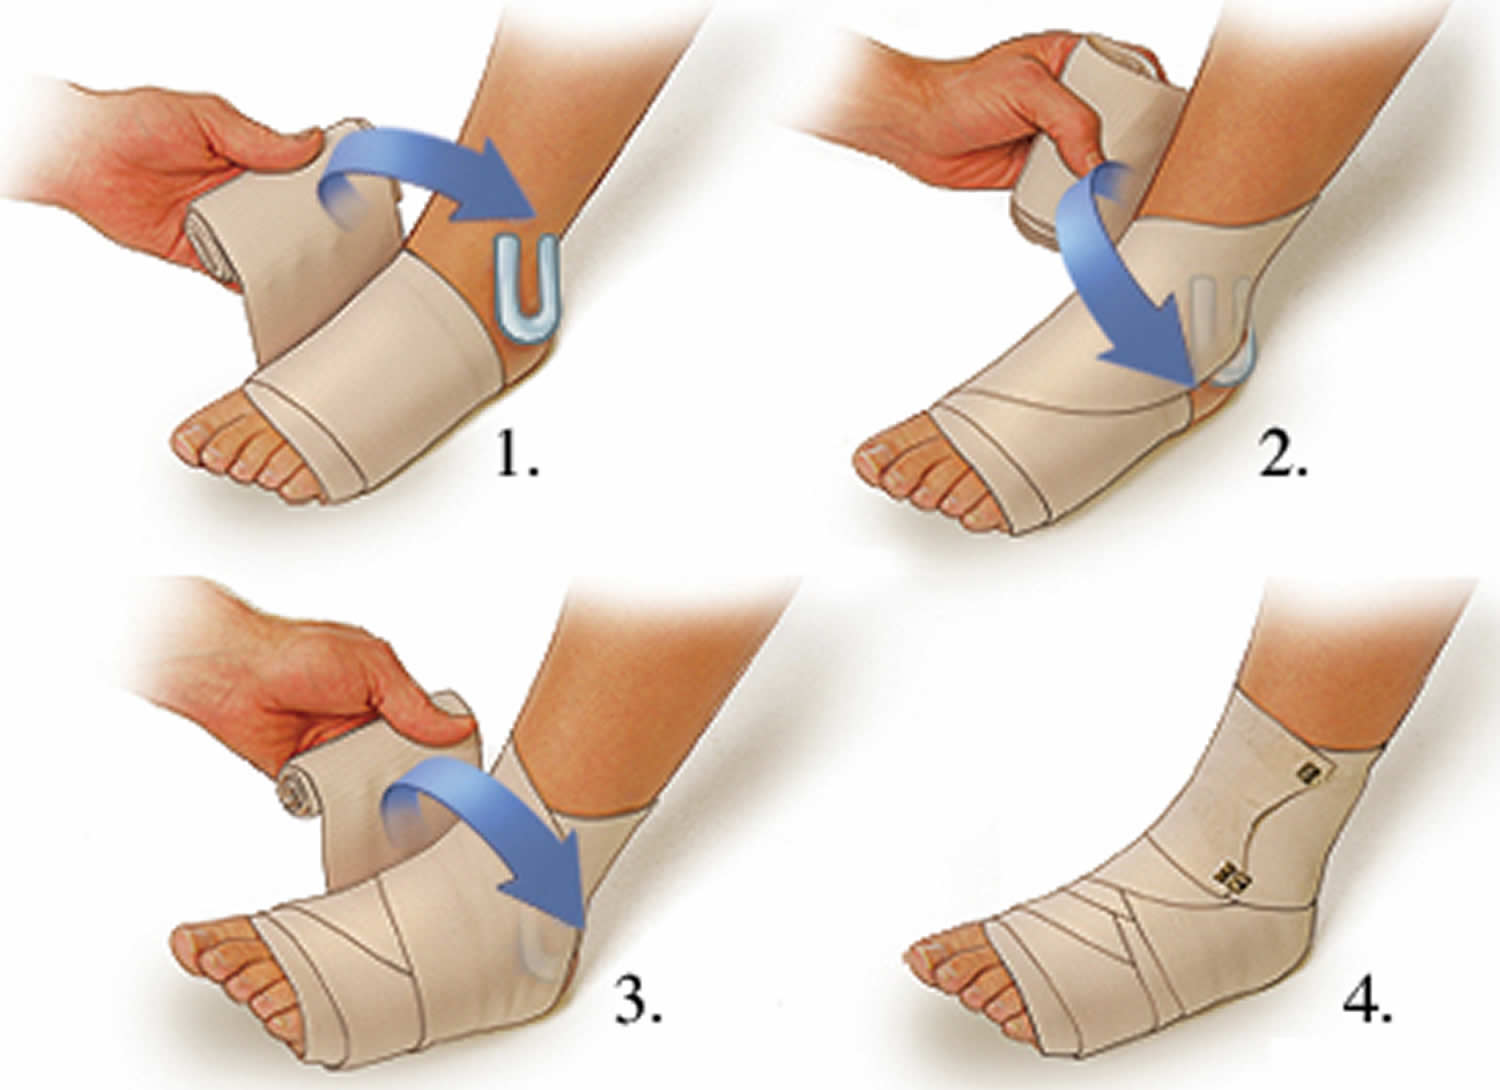 How to wrap a sprained ankle